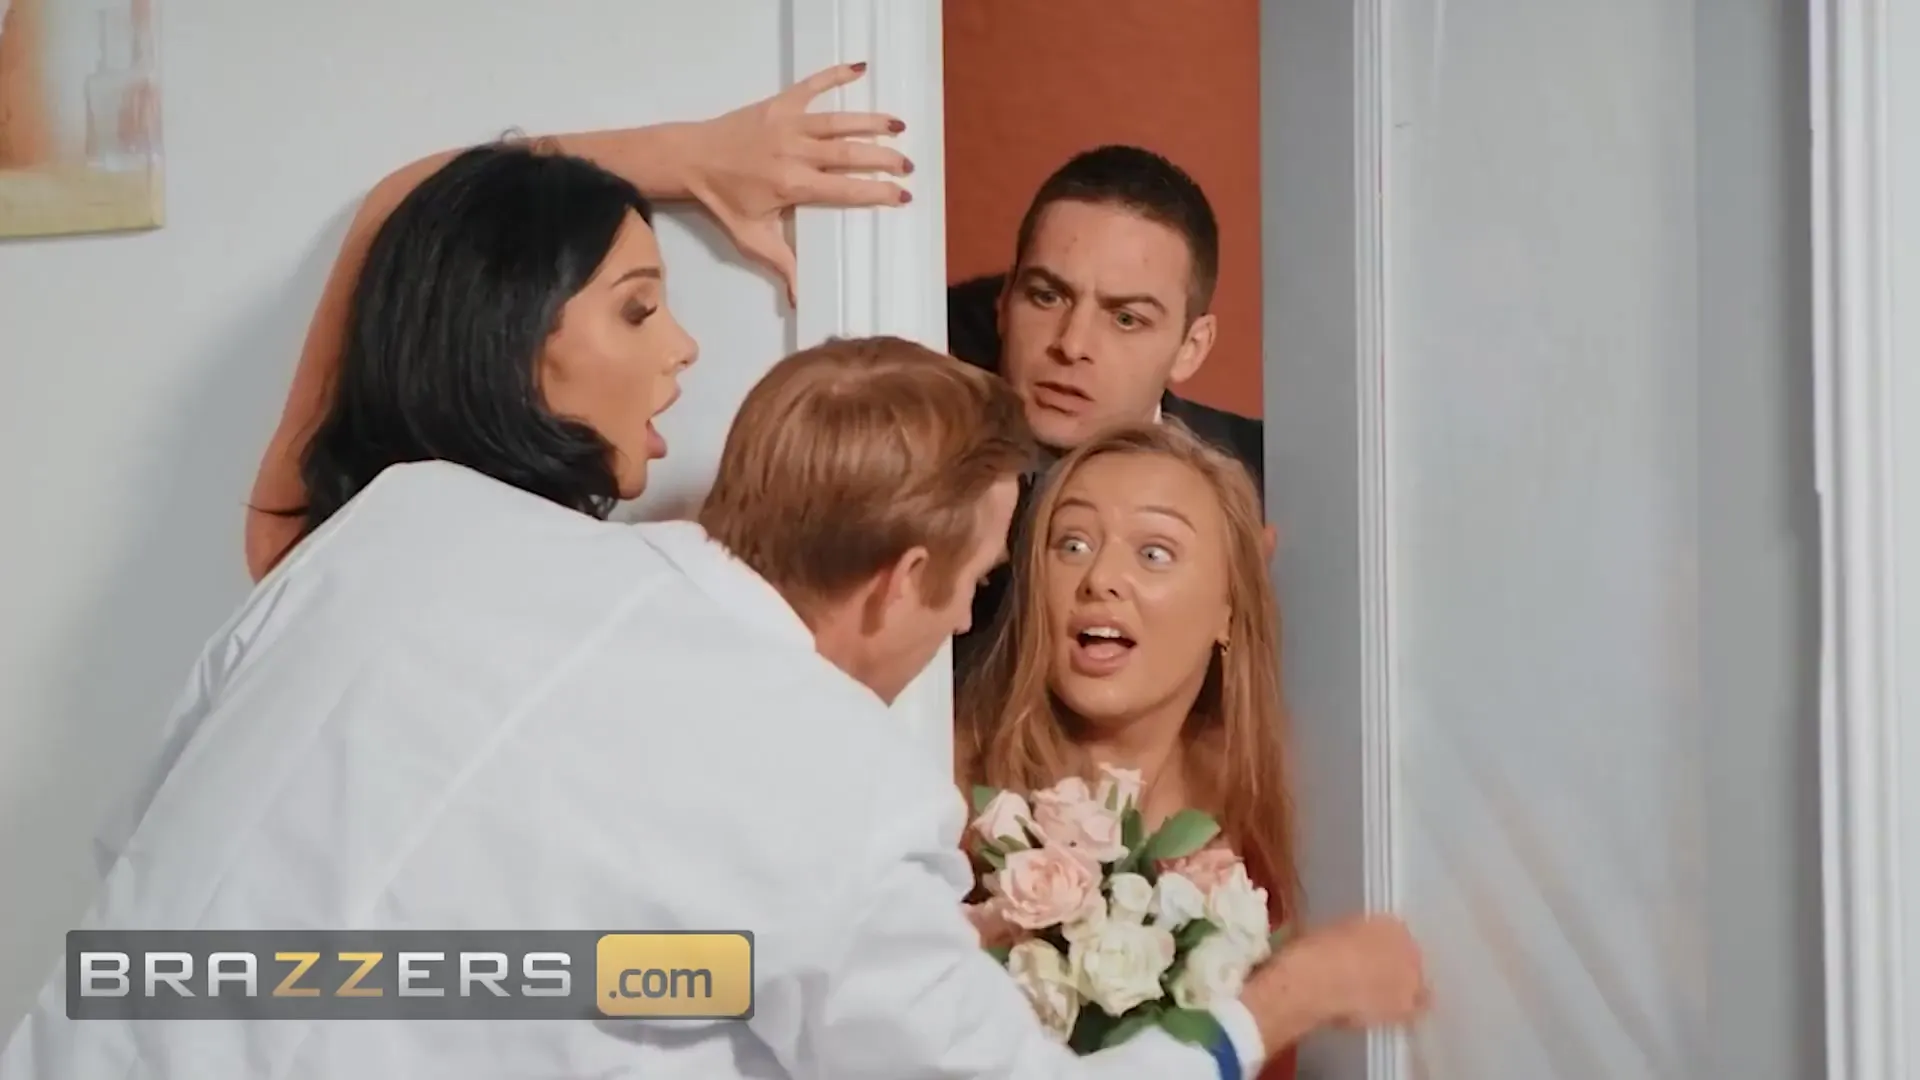 Busty bride cheating on groom with doctor before wedding! picture image